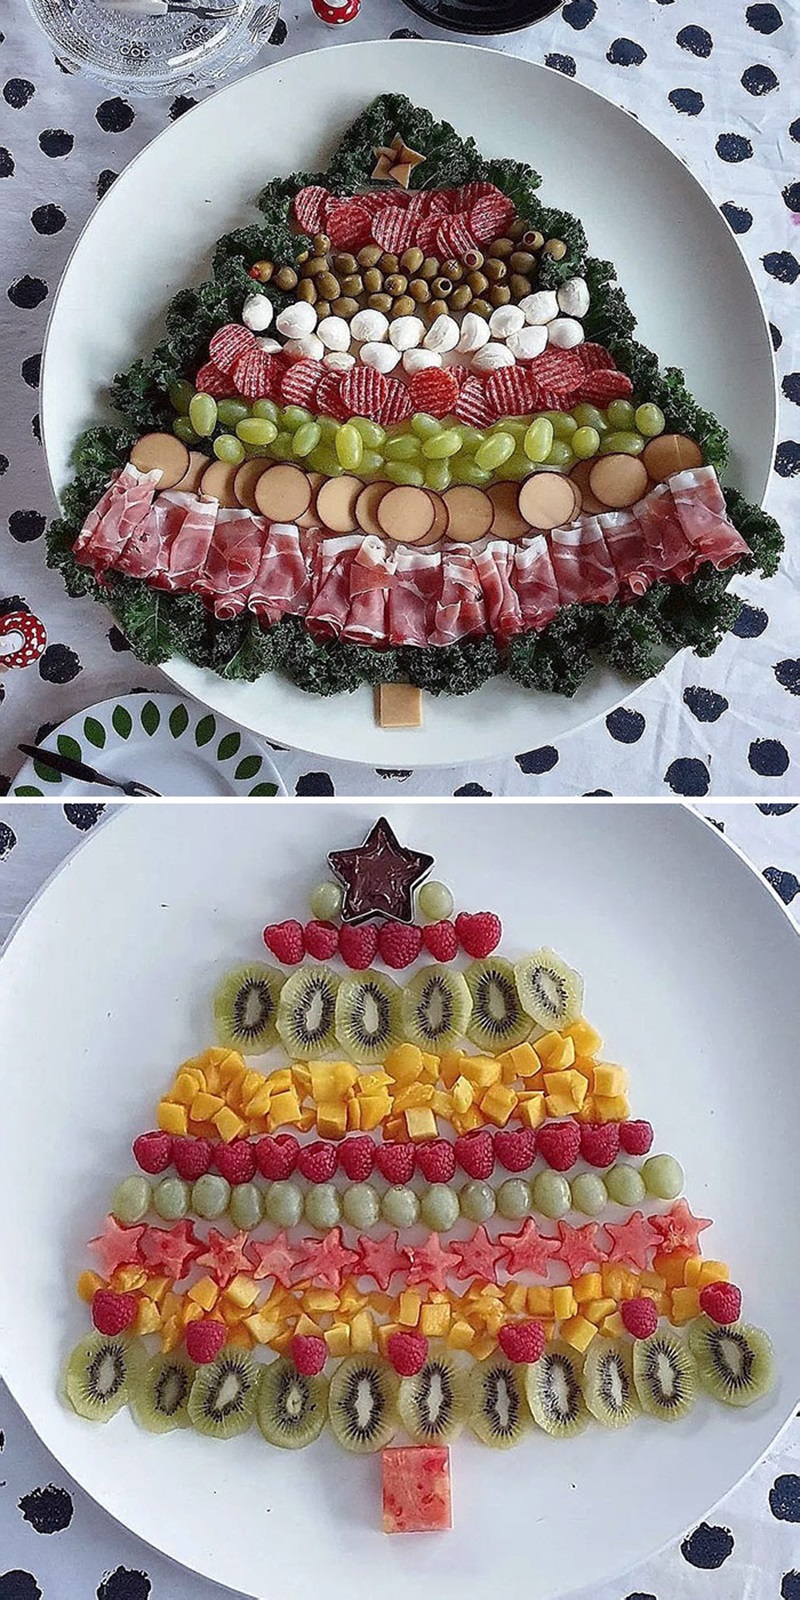 Here Are 2 Festive Edible Tips To Make For Christmas. I Made The Sausage Tray A Few Years Ago For The Sit-In Night And The Fruit Tray As A Snack For The Kids